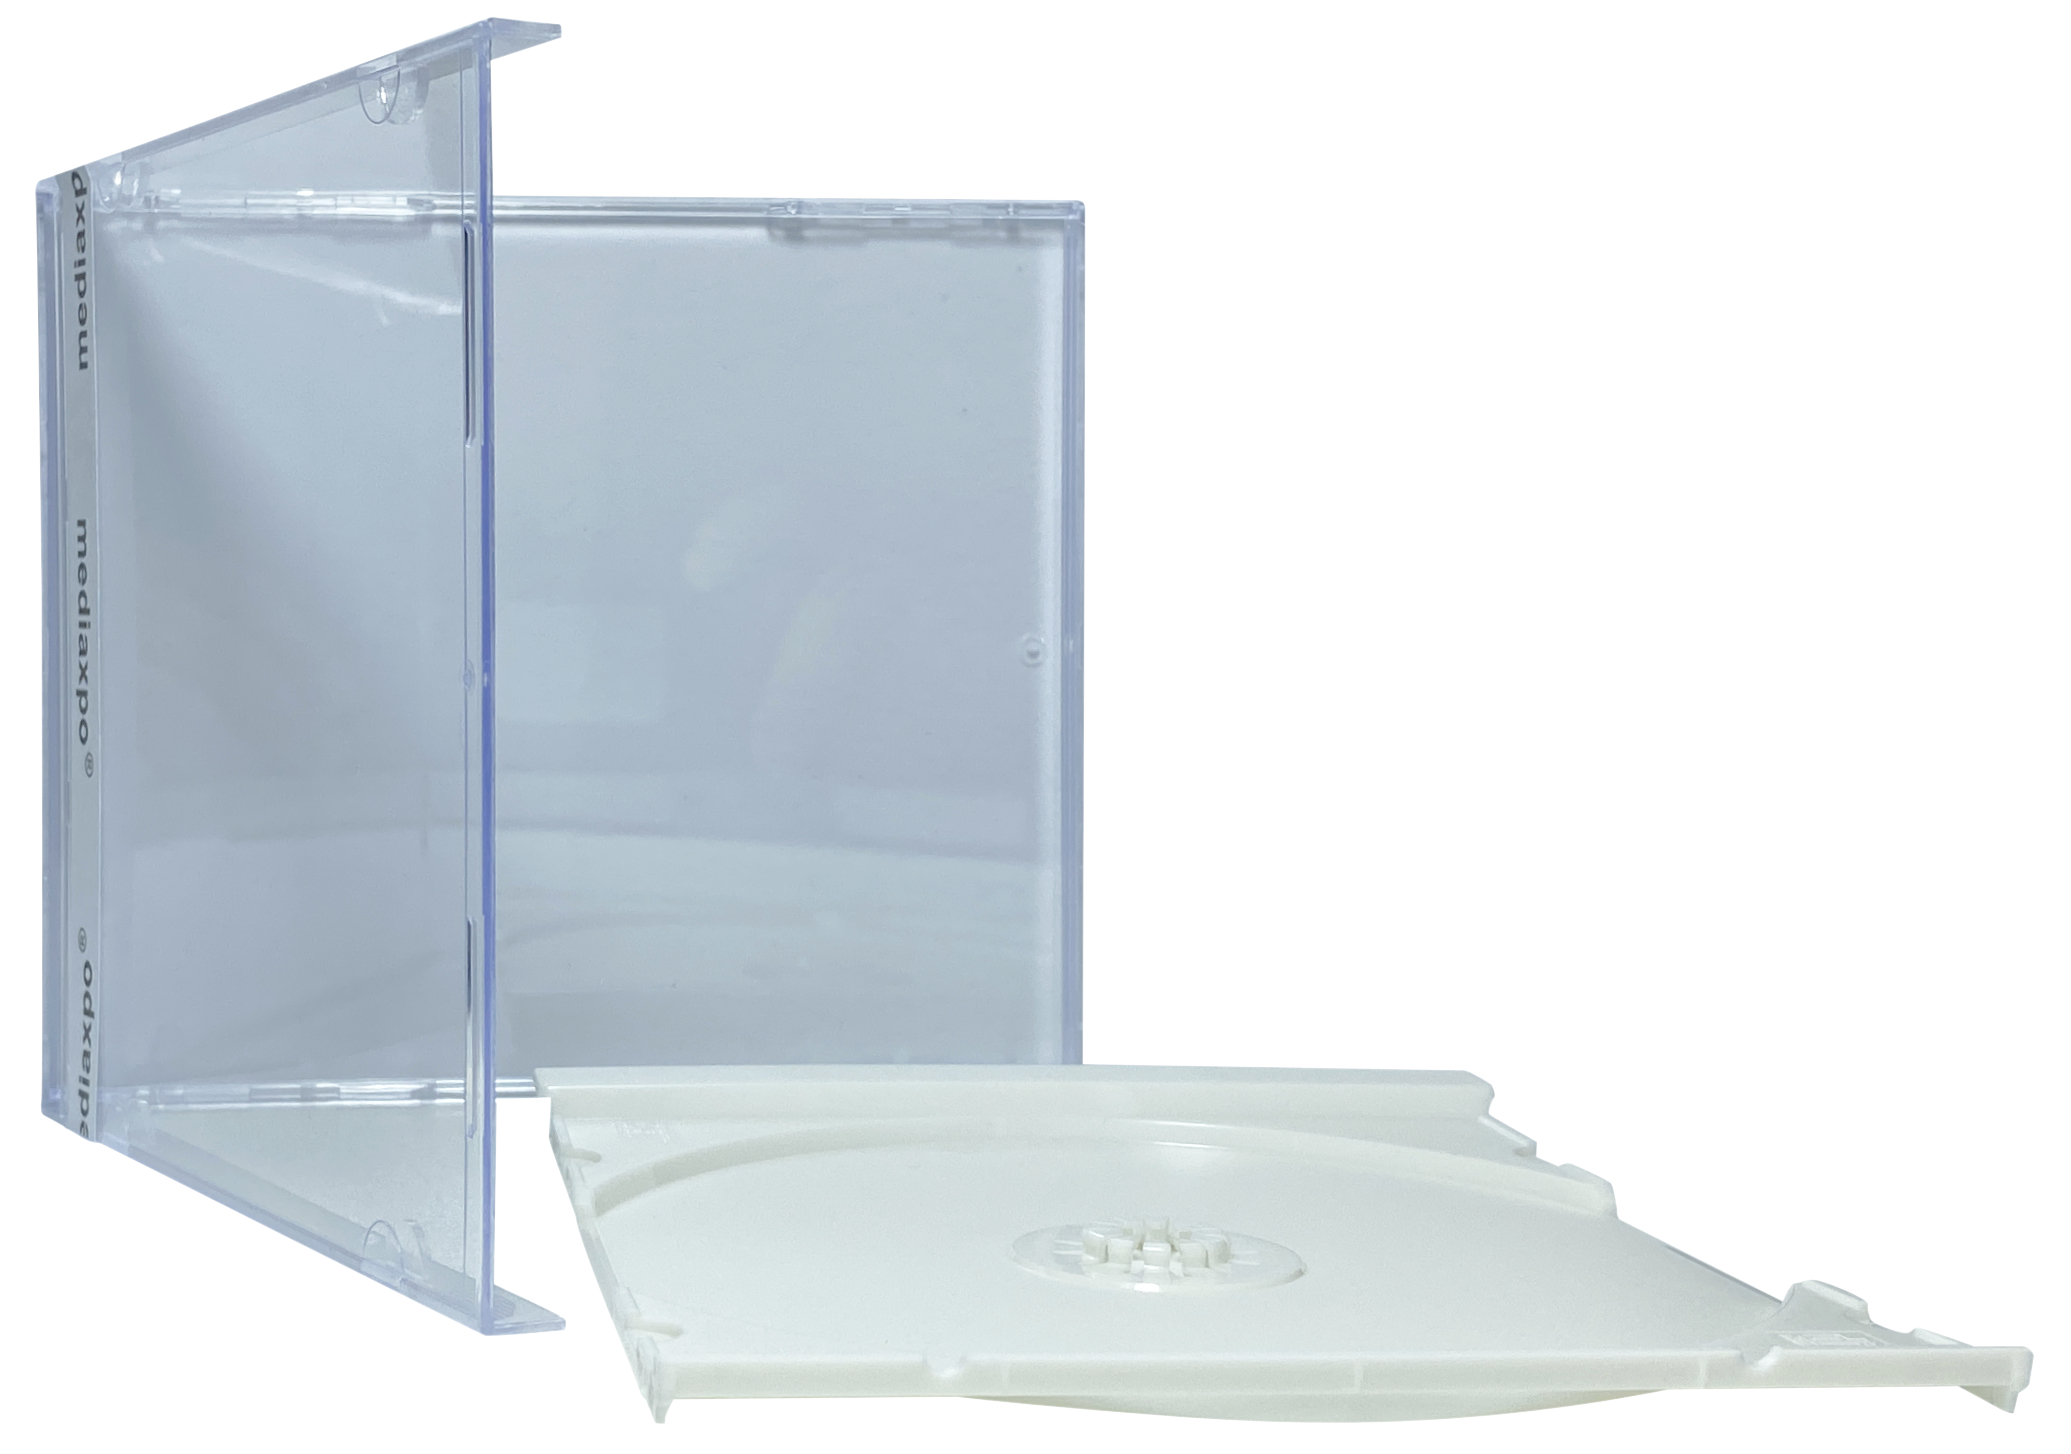 Image of ID 1214262407 1000 STANDARD White Color CD Jewel Case (Unassembled)